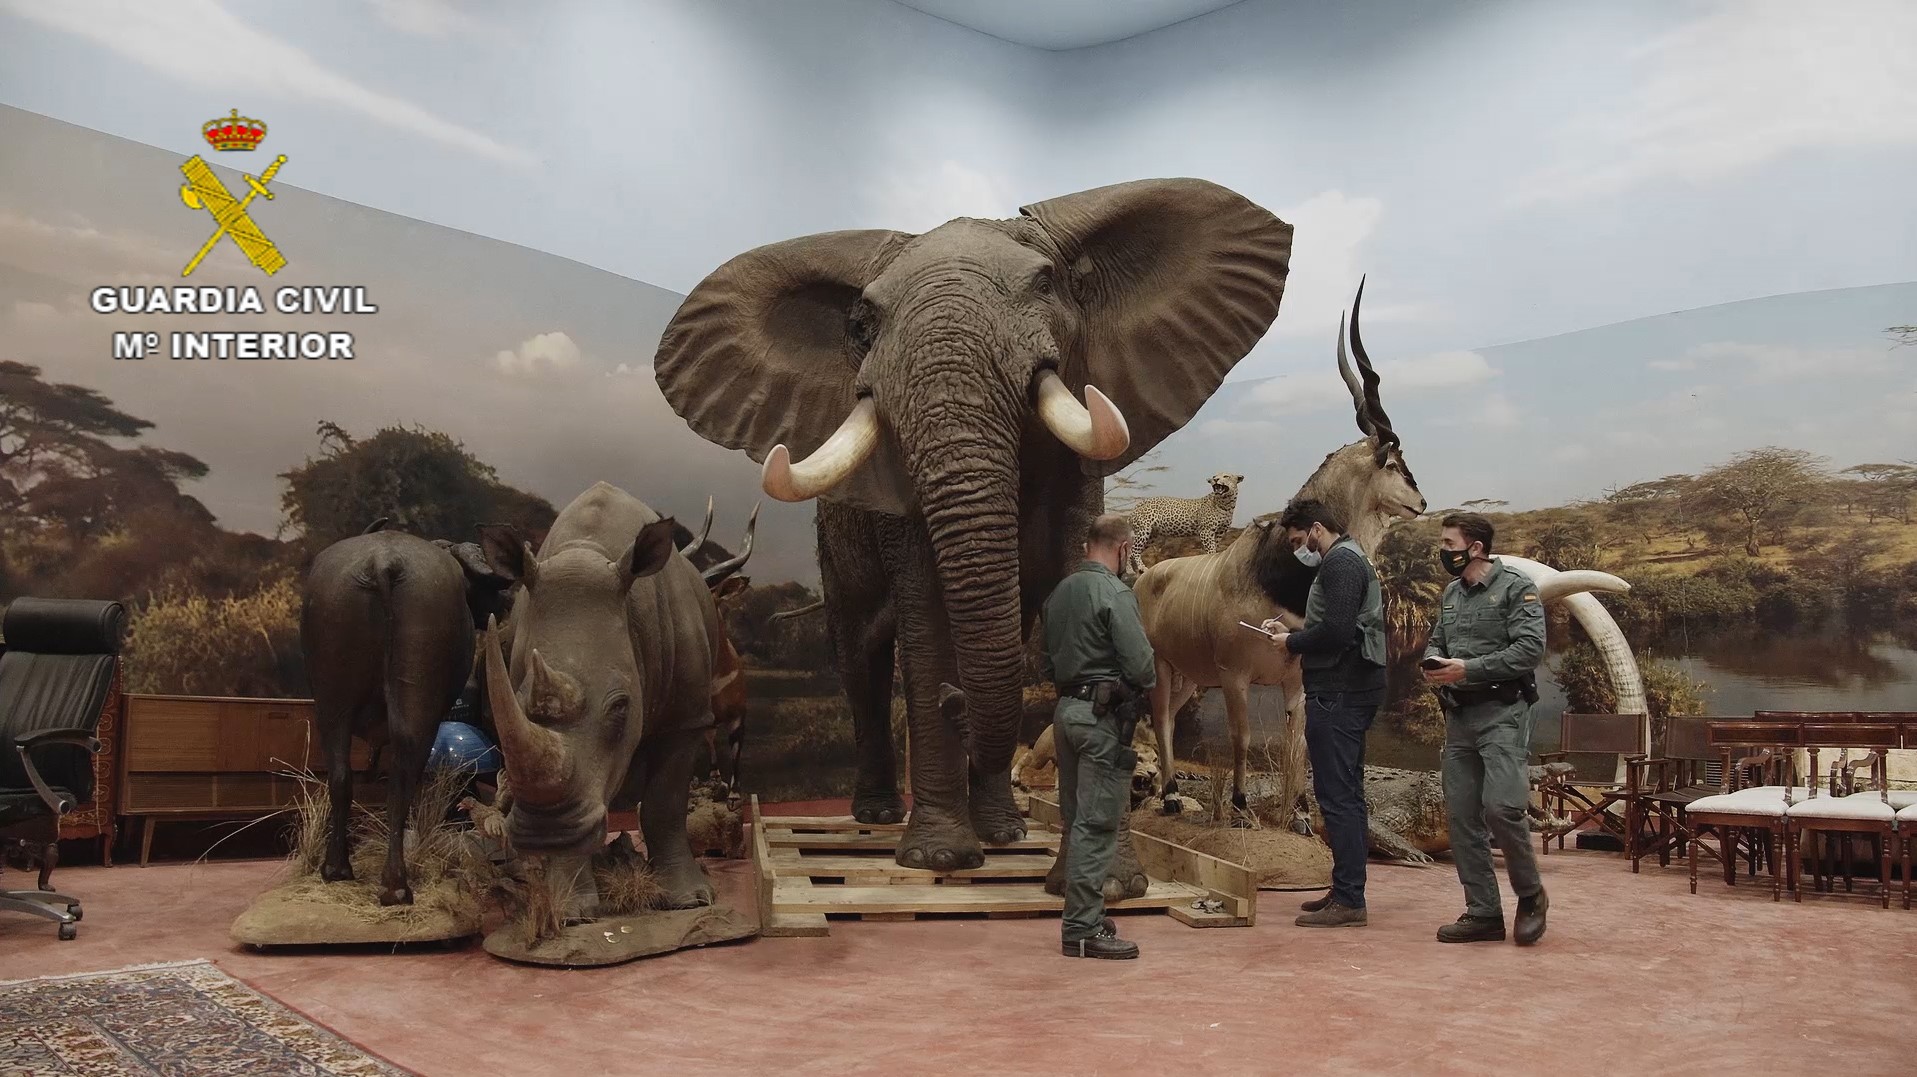 A taxidermy elephant, rhino and cheetah, as well as other animals, from the collection seized by Spanish police.